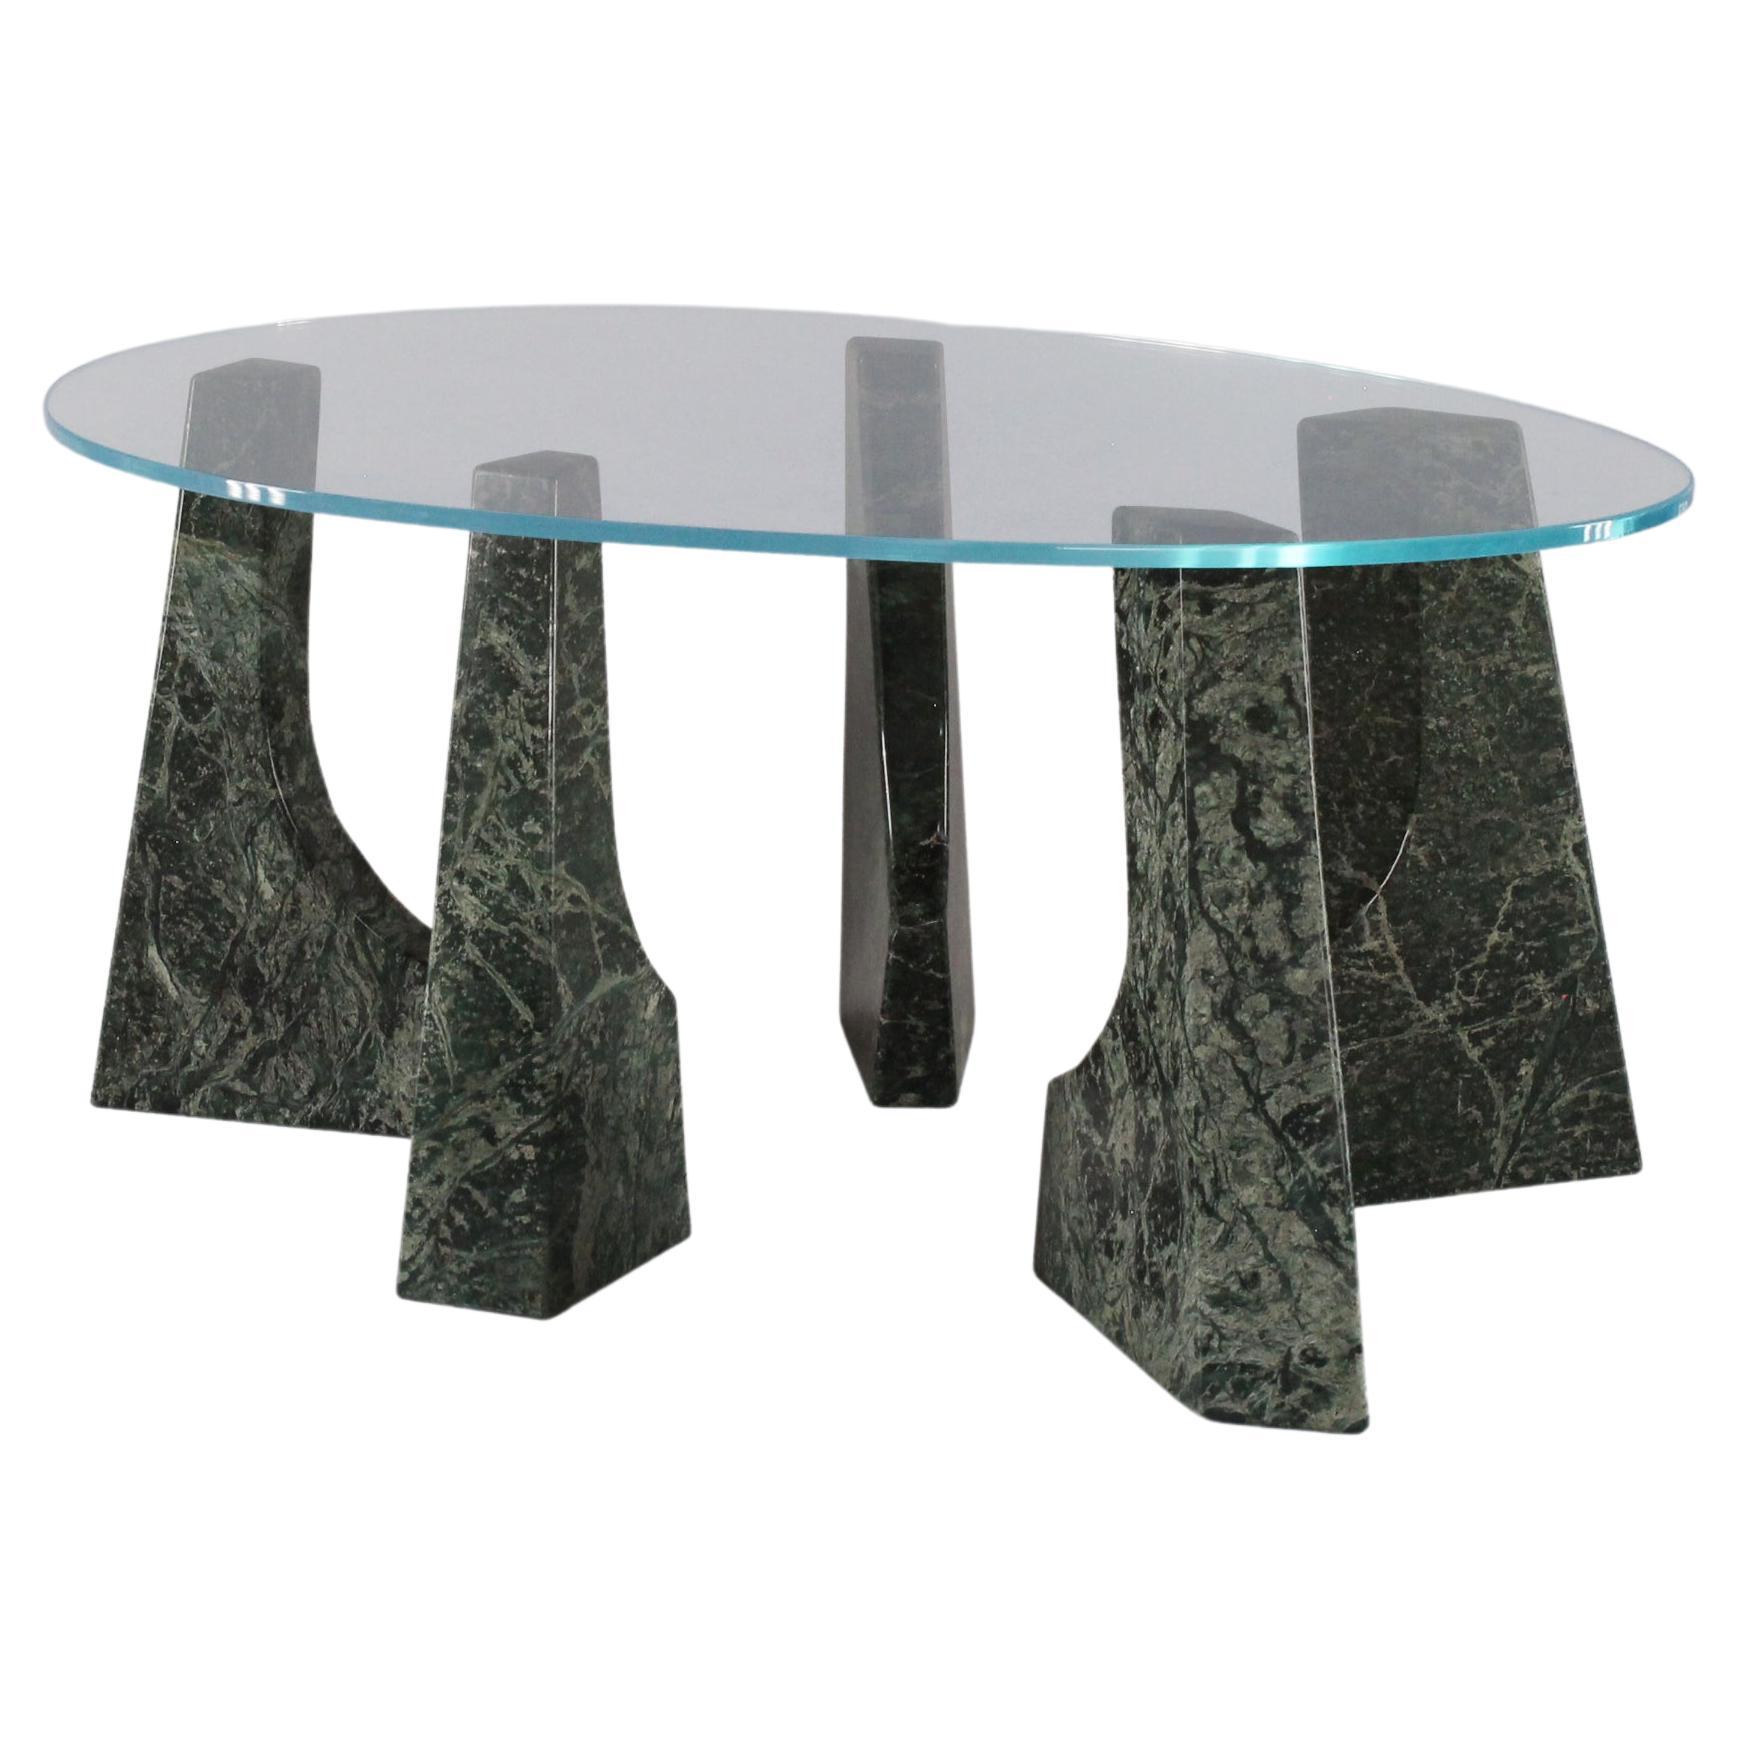 Trama Small Table, Tikal Marble Bases and Glass Top, Contemporary Mexican Design